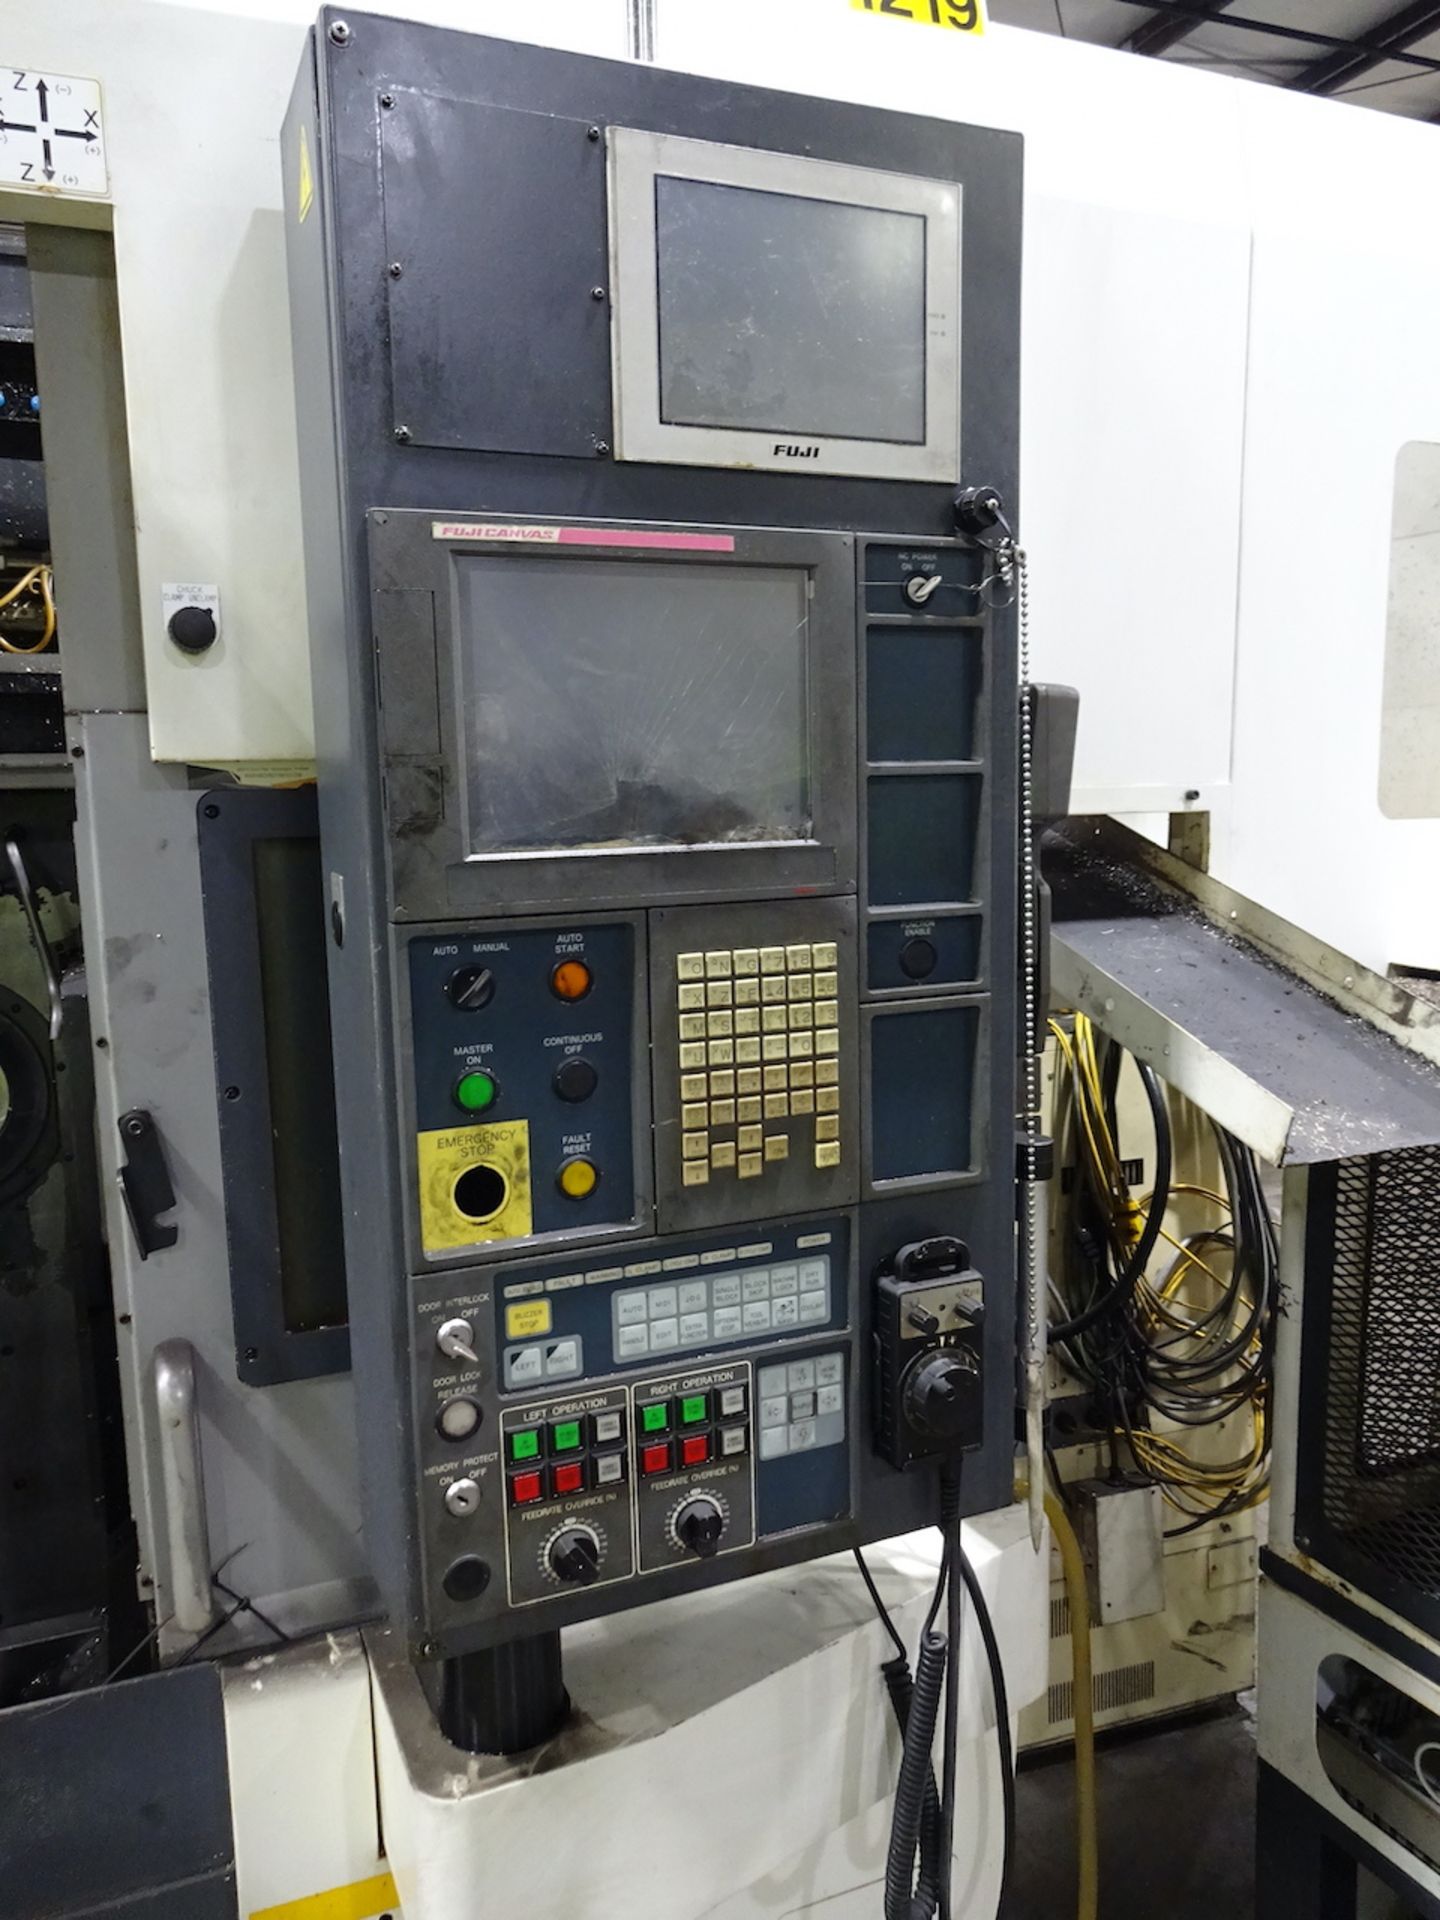 FUJI CSD-300 TWIN SPINDLE CNC LATHE (2014) S/N SE0102378, GANTRY LOAD AND STOCKER TABLE, RECOMMENDED - Image 3 of 18